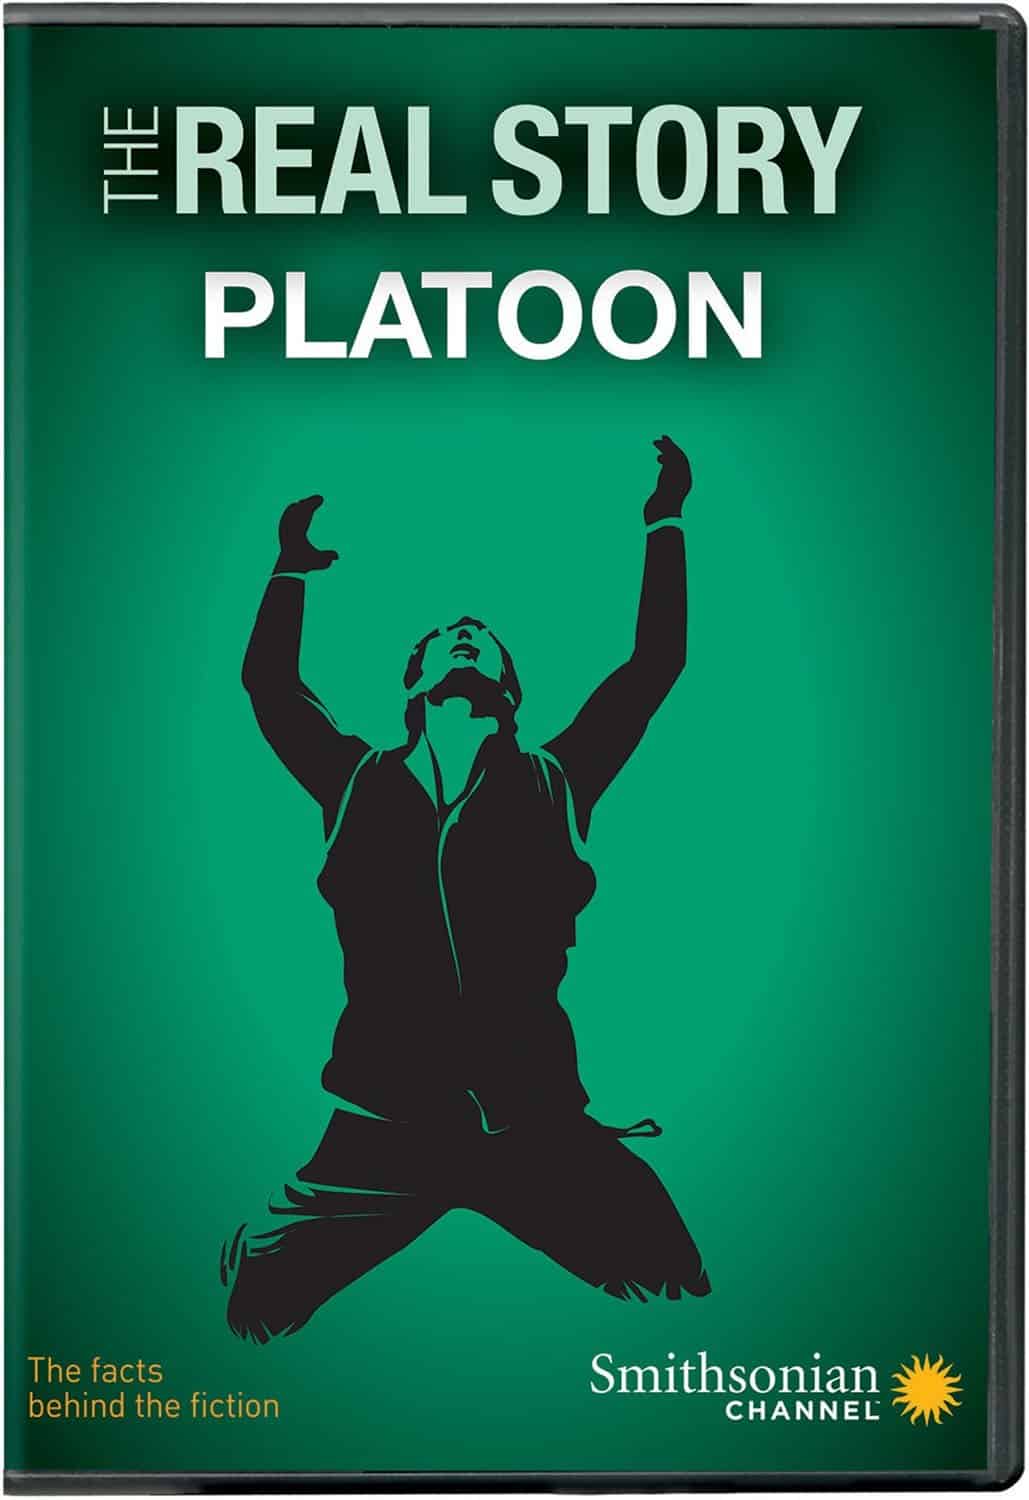 The Real Story Platoon